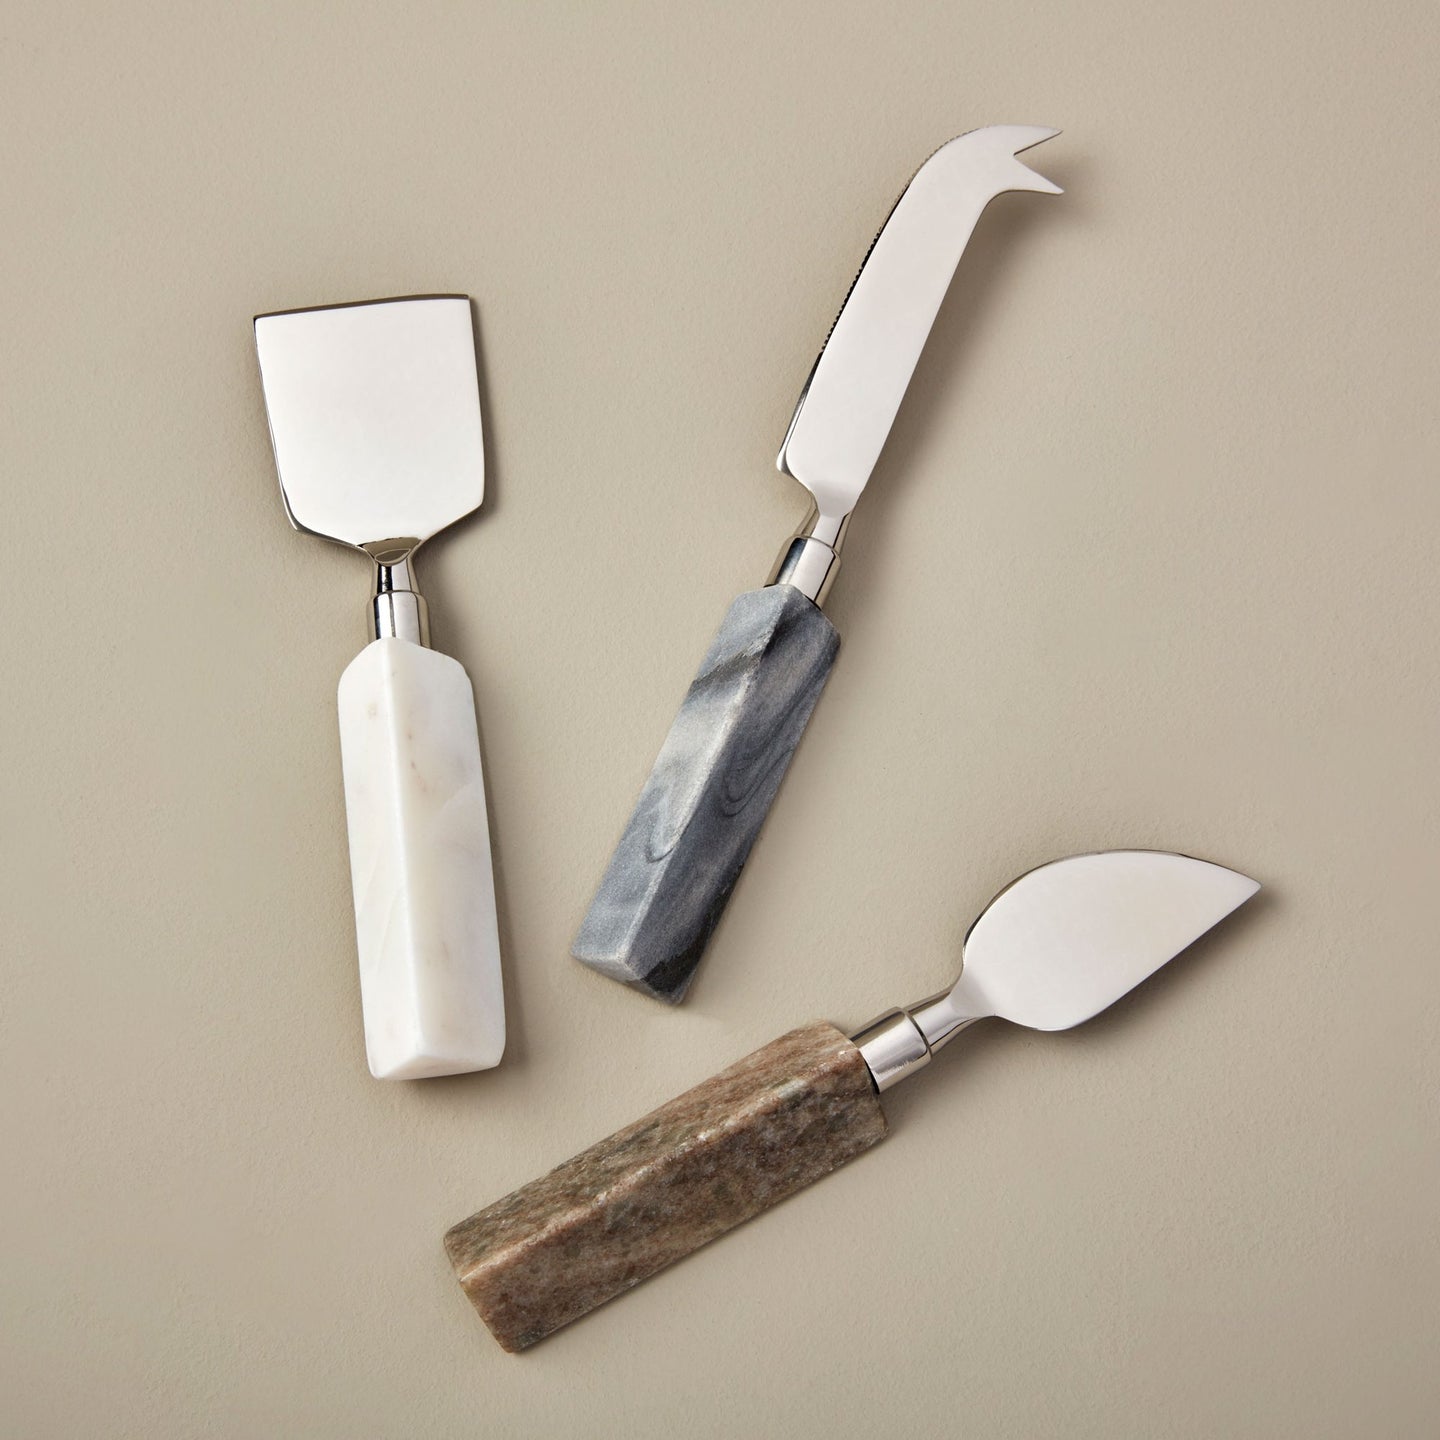 Set of 3 Geometric Marble Cheese Knives